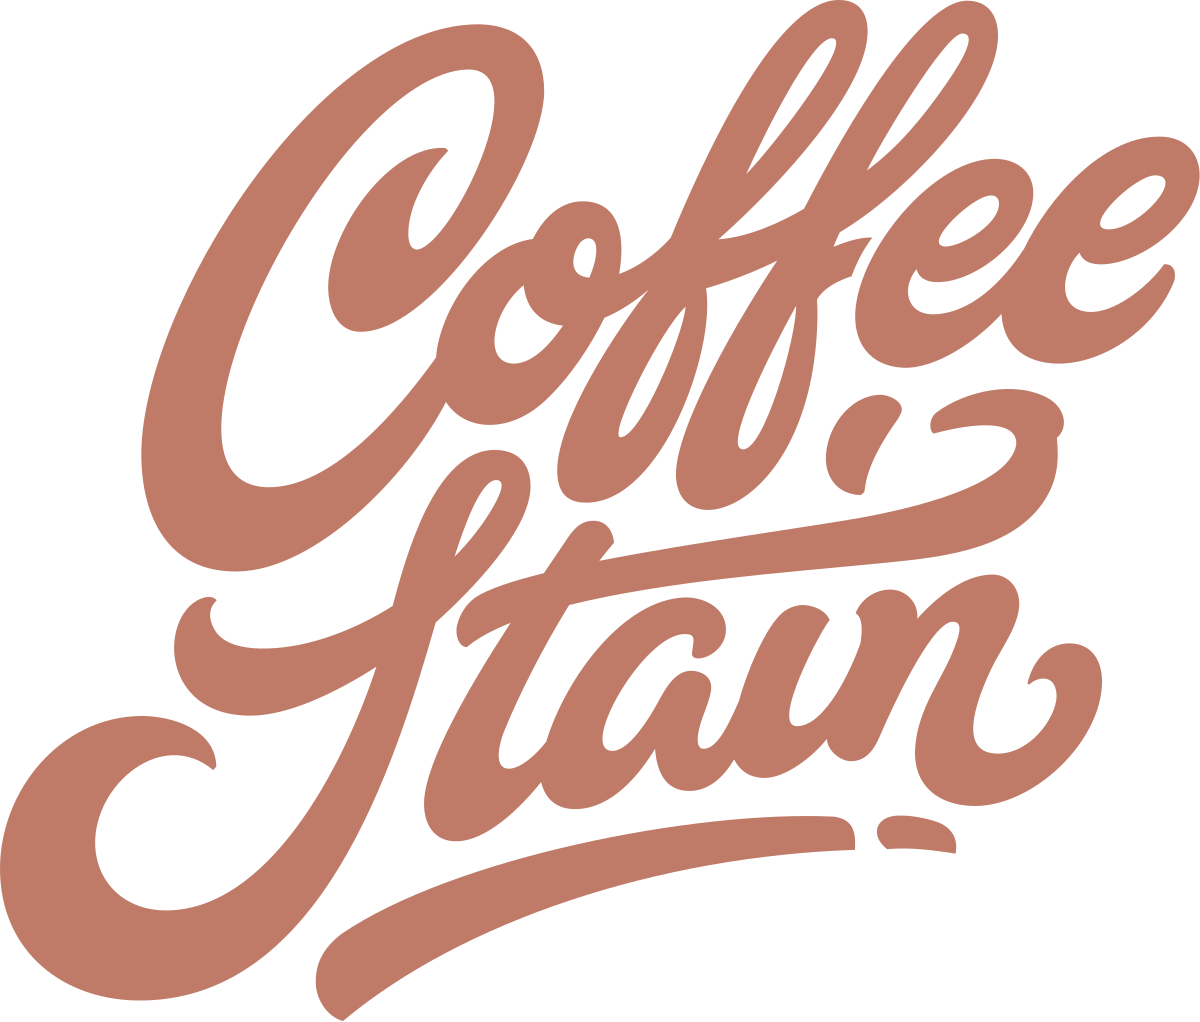 Coffee Stain Logo Design PNG image